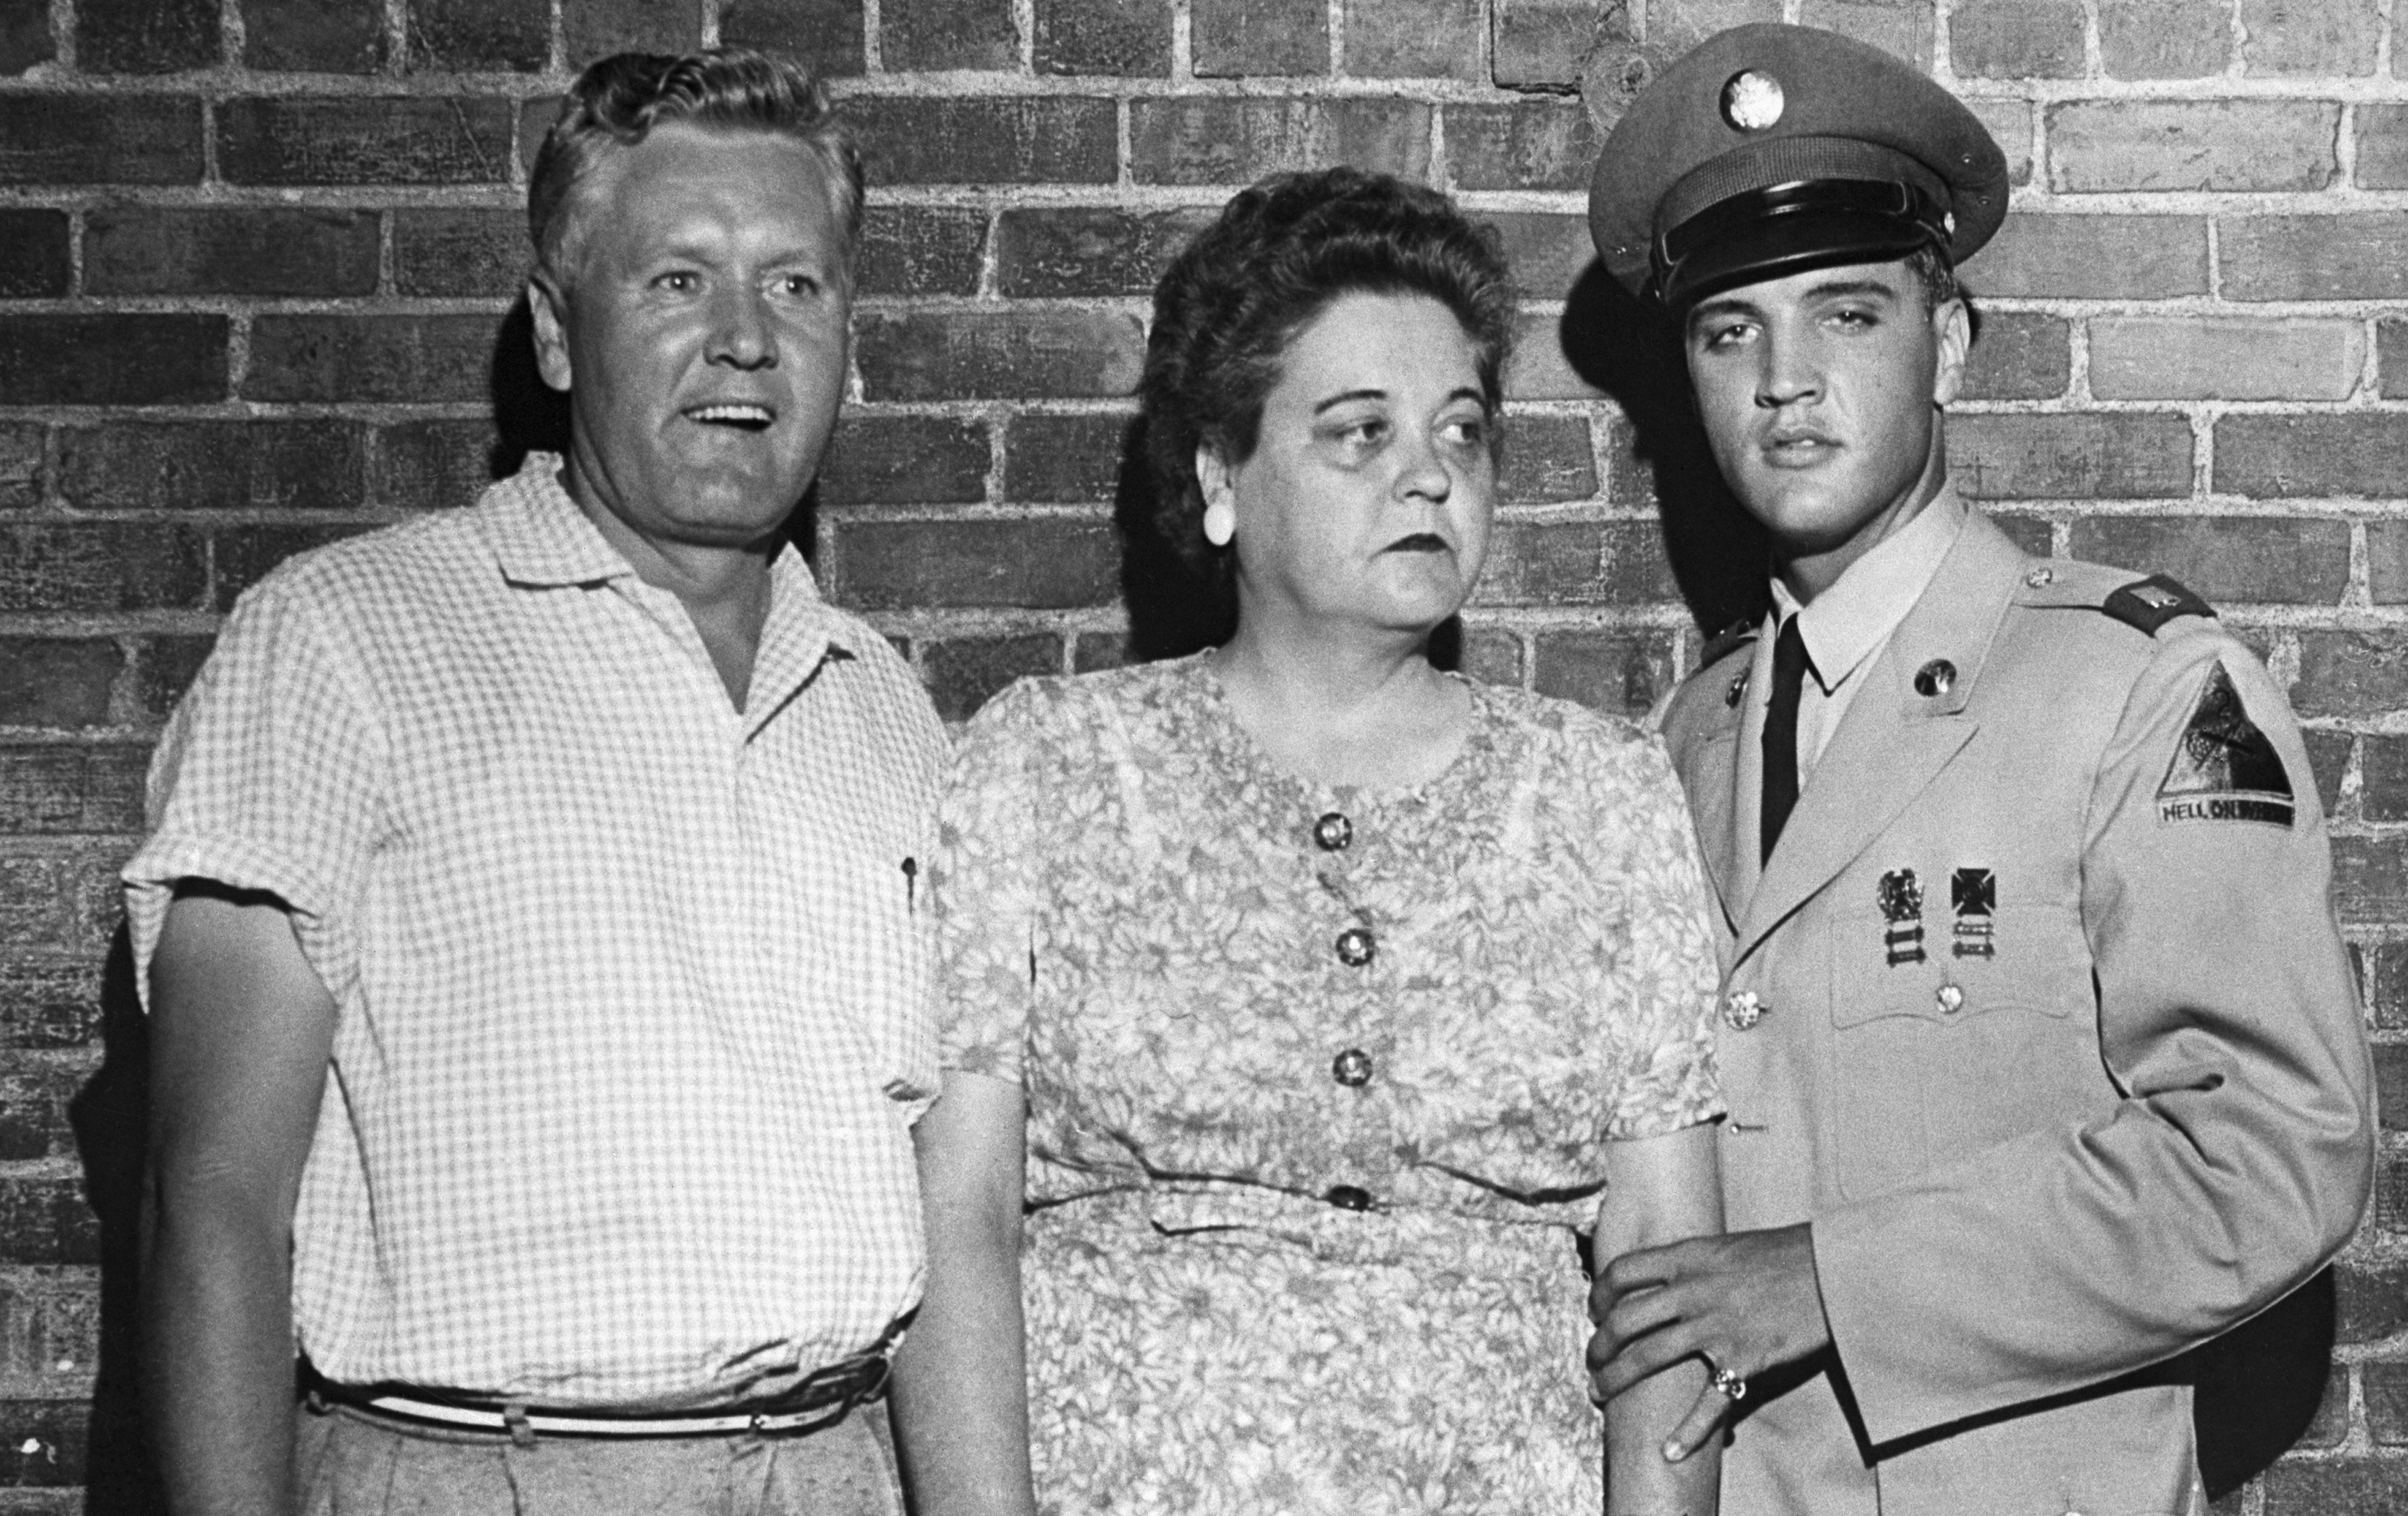 Elvis Presley escorts his parents, Mr. and Mrs. Presley, from their mansion for a sneak preview of the entertainer's latest movie. | Source: Getty Images